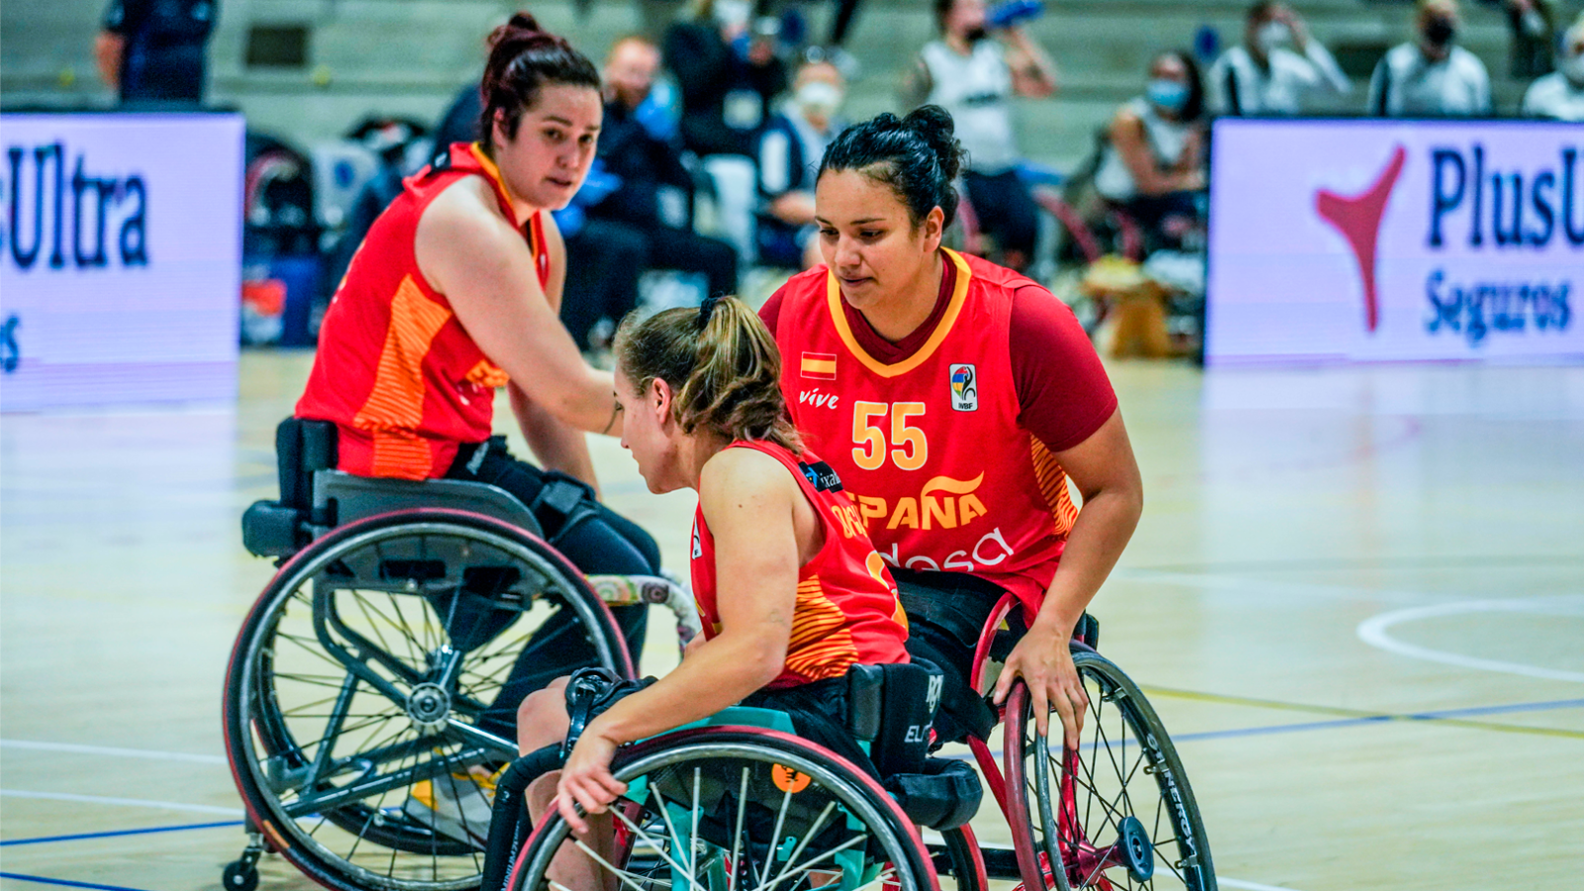 Plus Ultra Seguros supports adaptive sport by sponsoring the European Wheelchair Basketball Championship